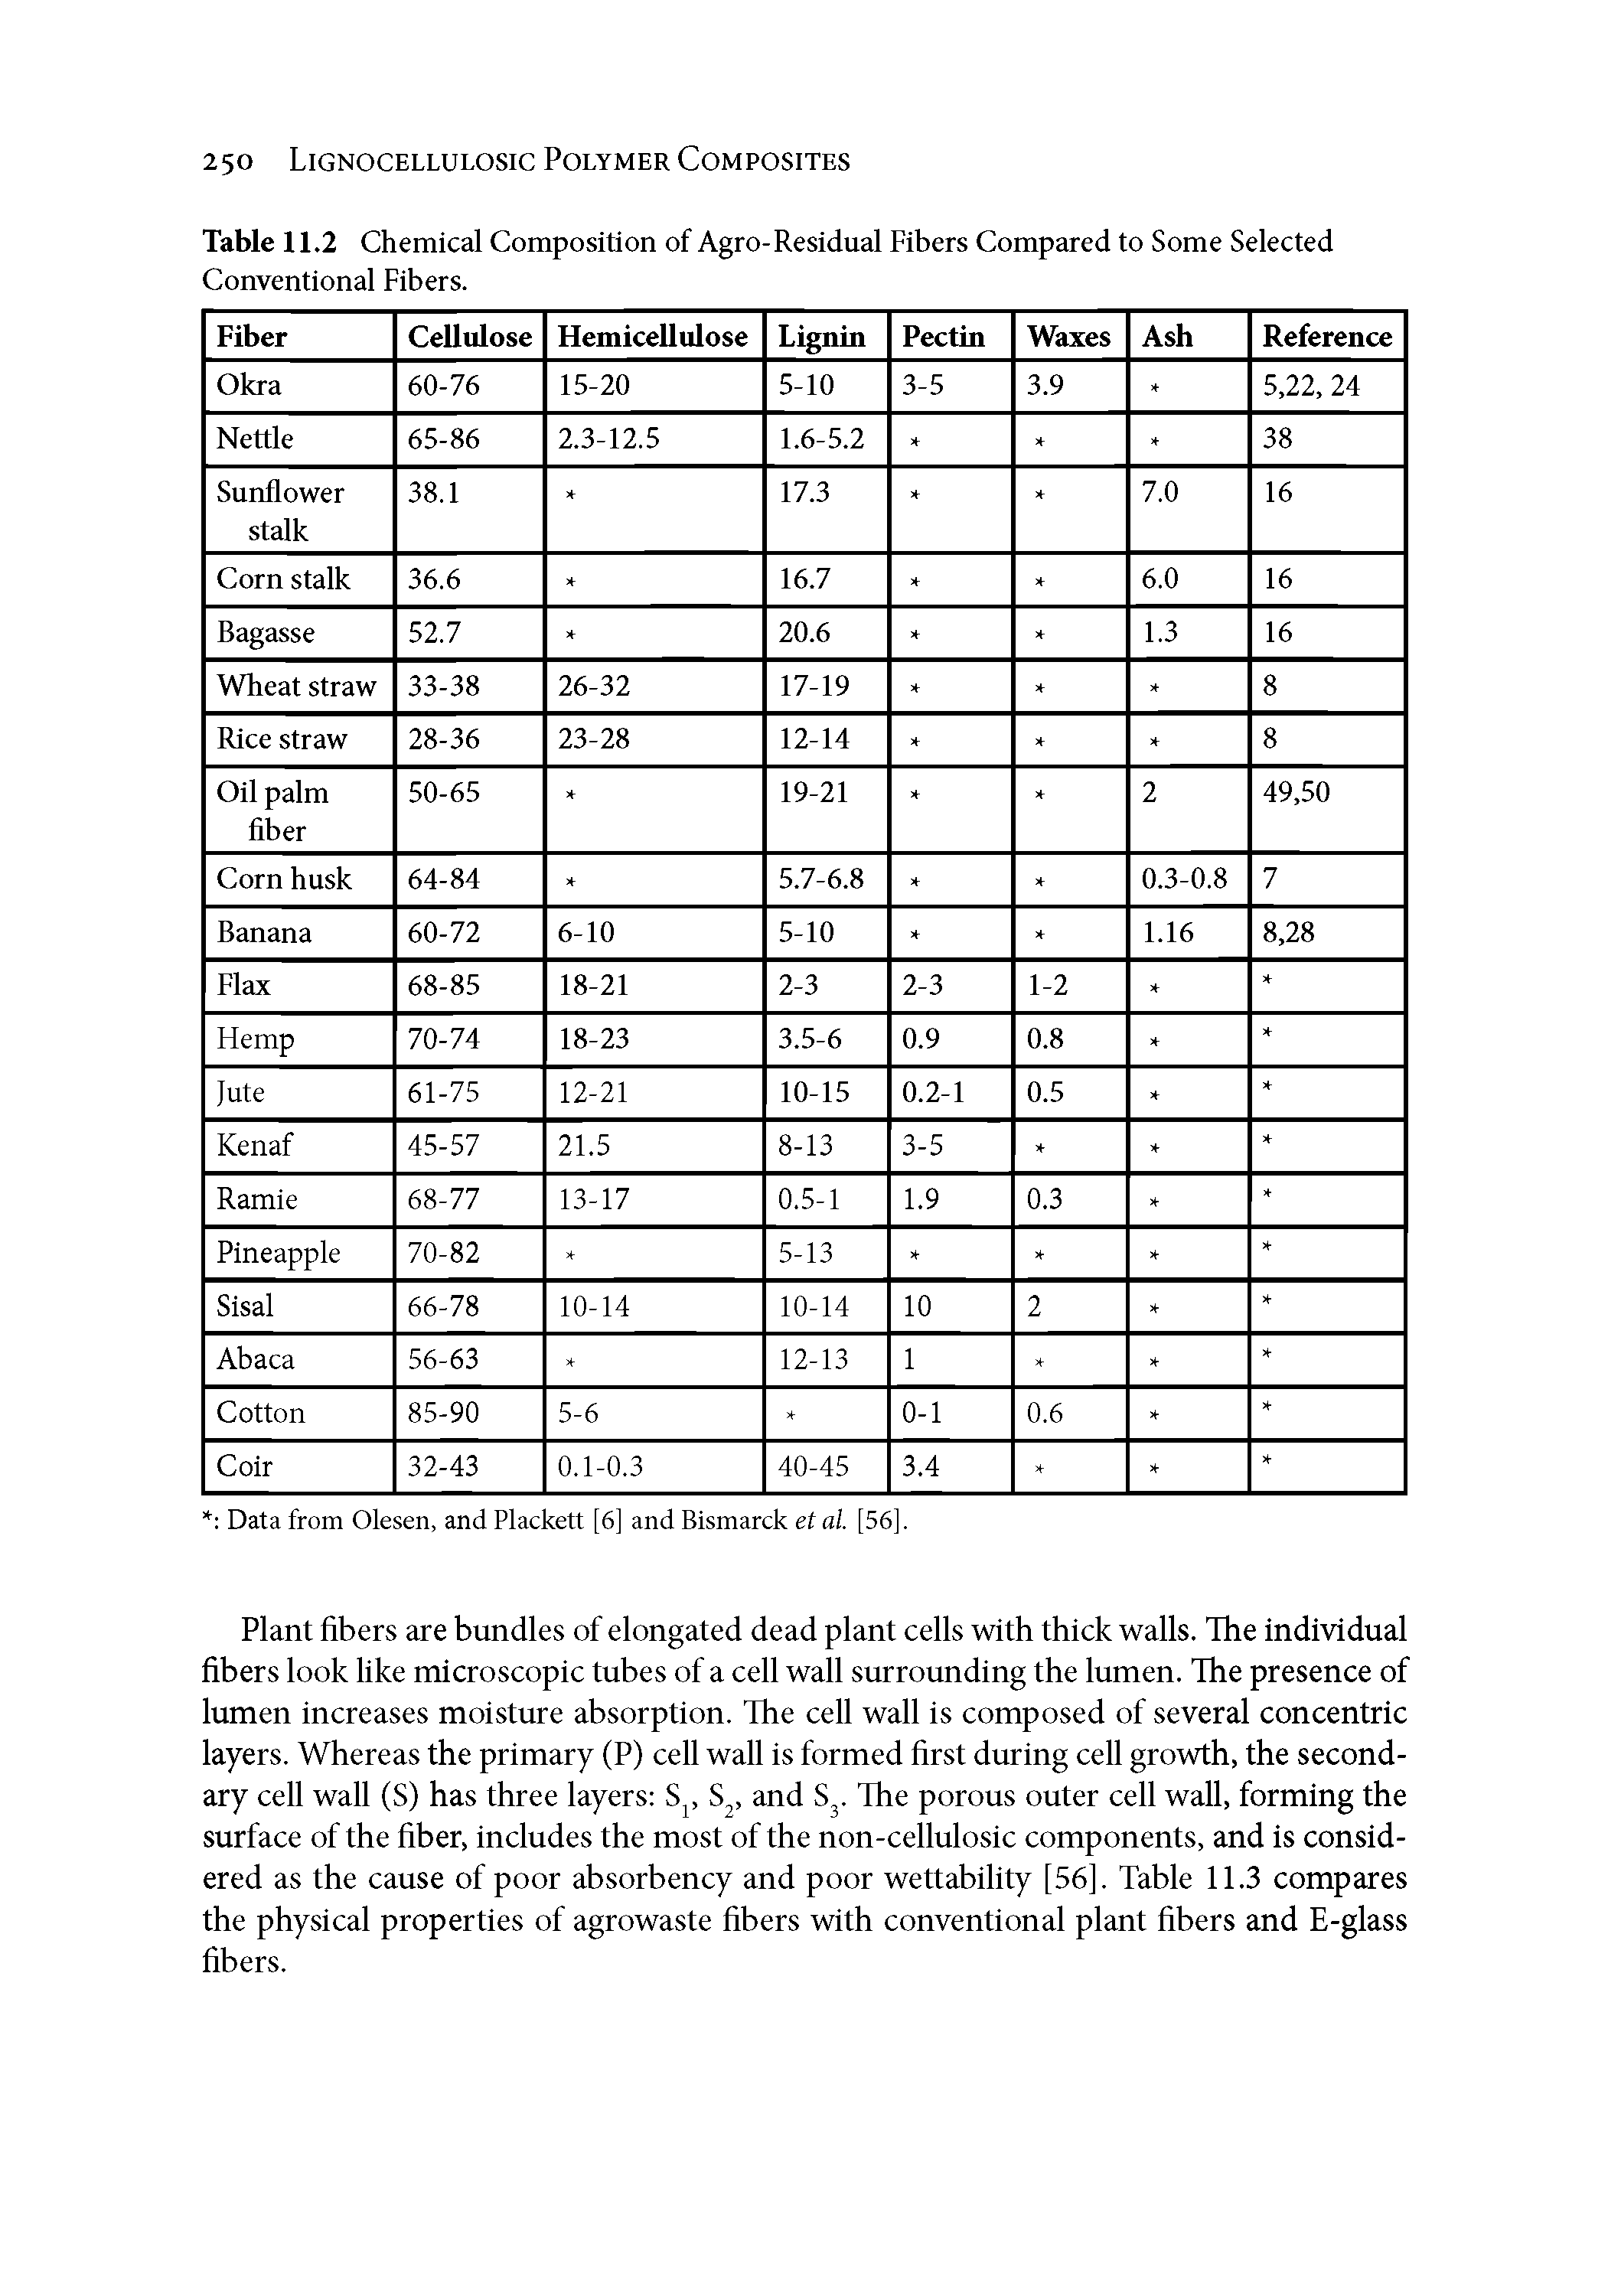 Table 11.2 Chemical Composition of Agro-Residual Fibers Compared to Some Selected Conventional Fibers.